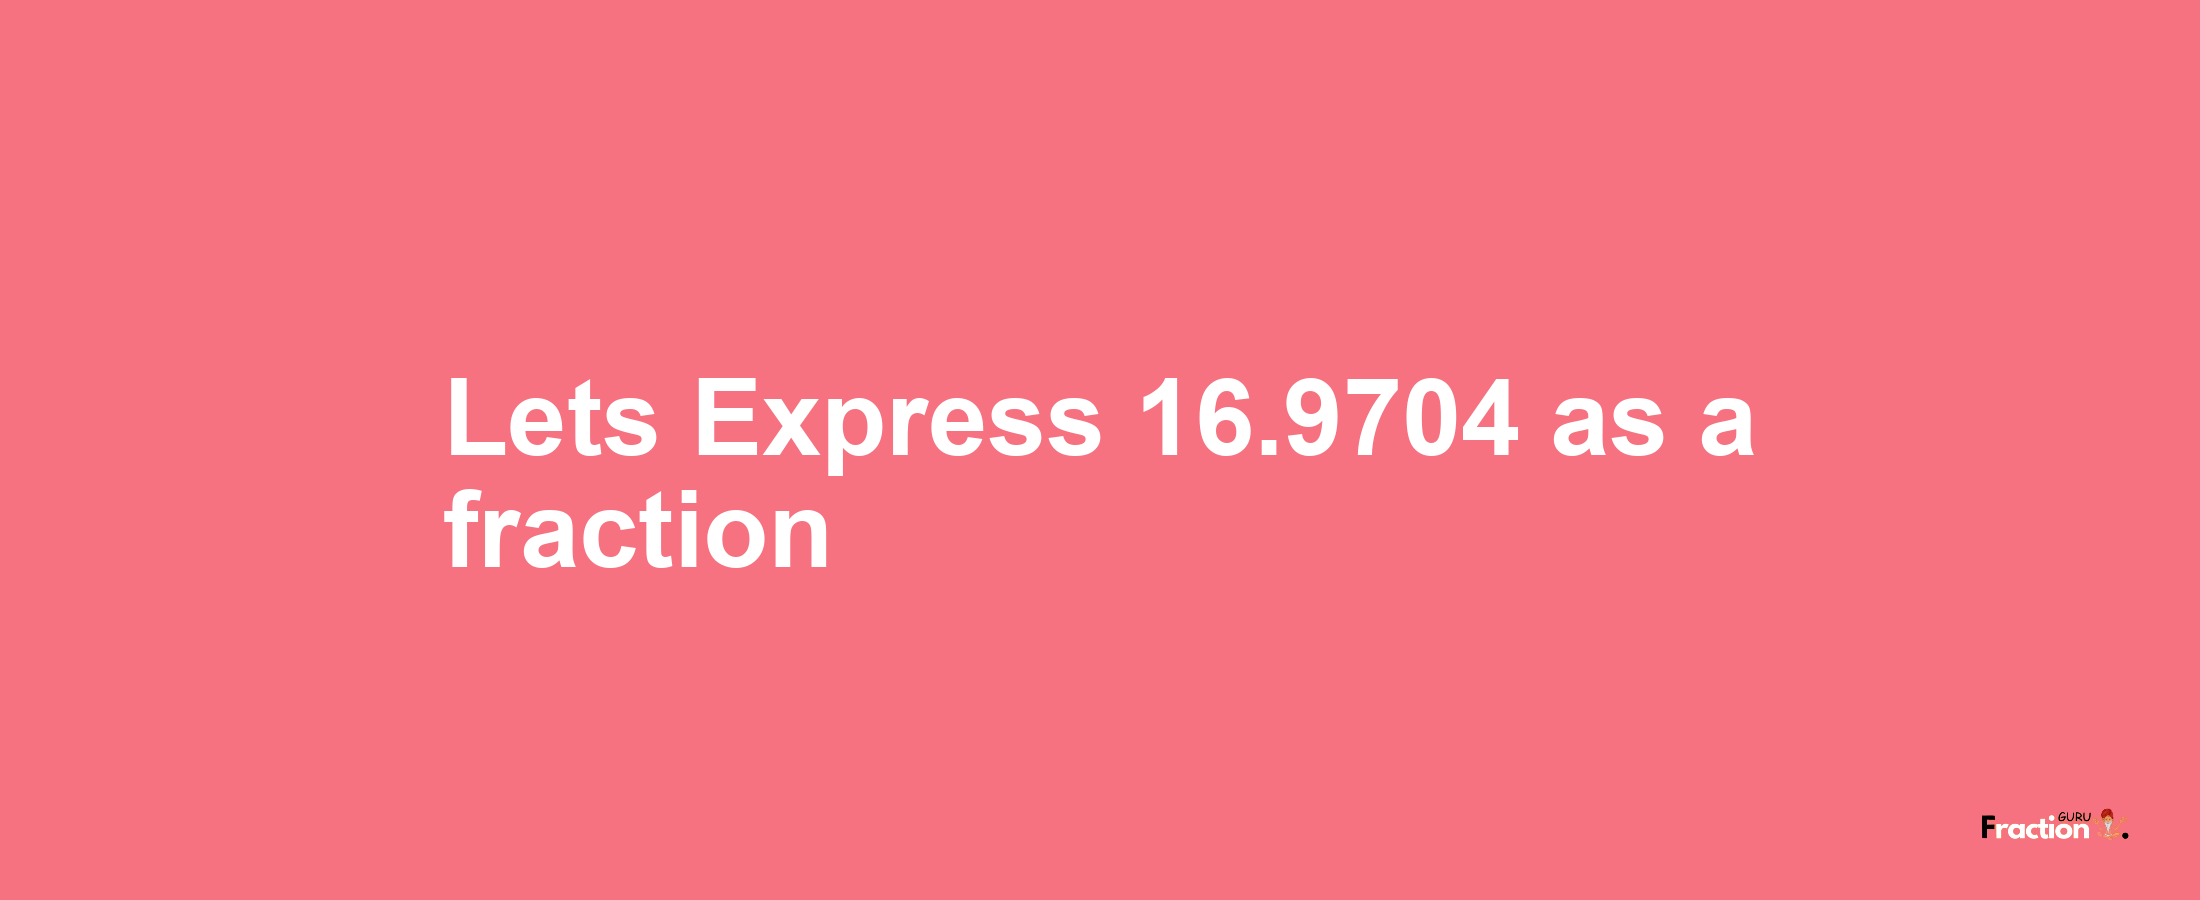 Lets Express 16.9704 as afraction